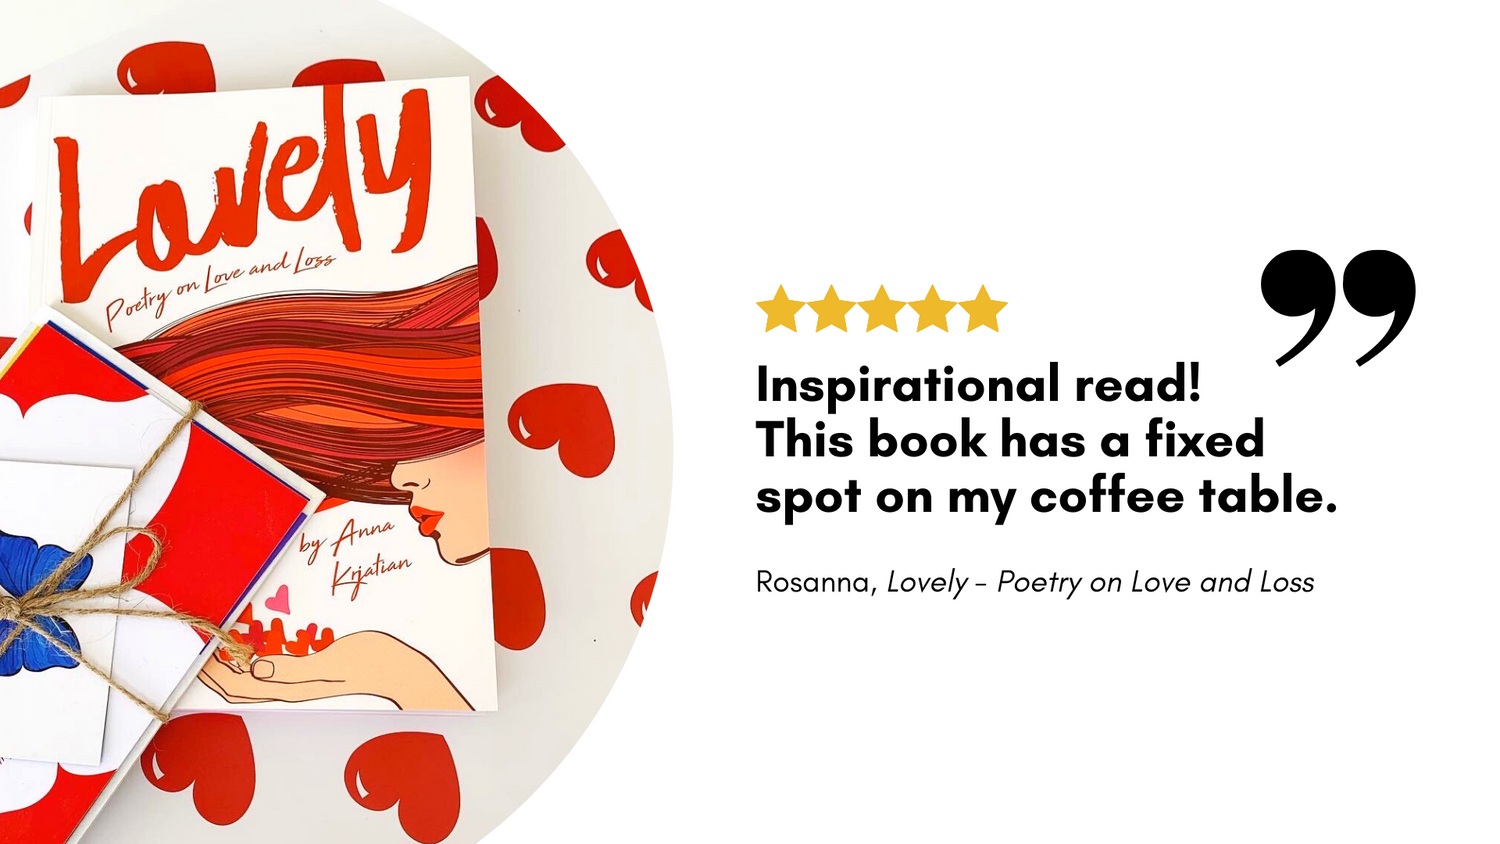 5 star book review from Rosanna for  "Lovely - Poetry on Love and Loss" reads: "Inspirational Read! This book has a fixed spot on my coffee table." 